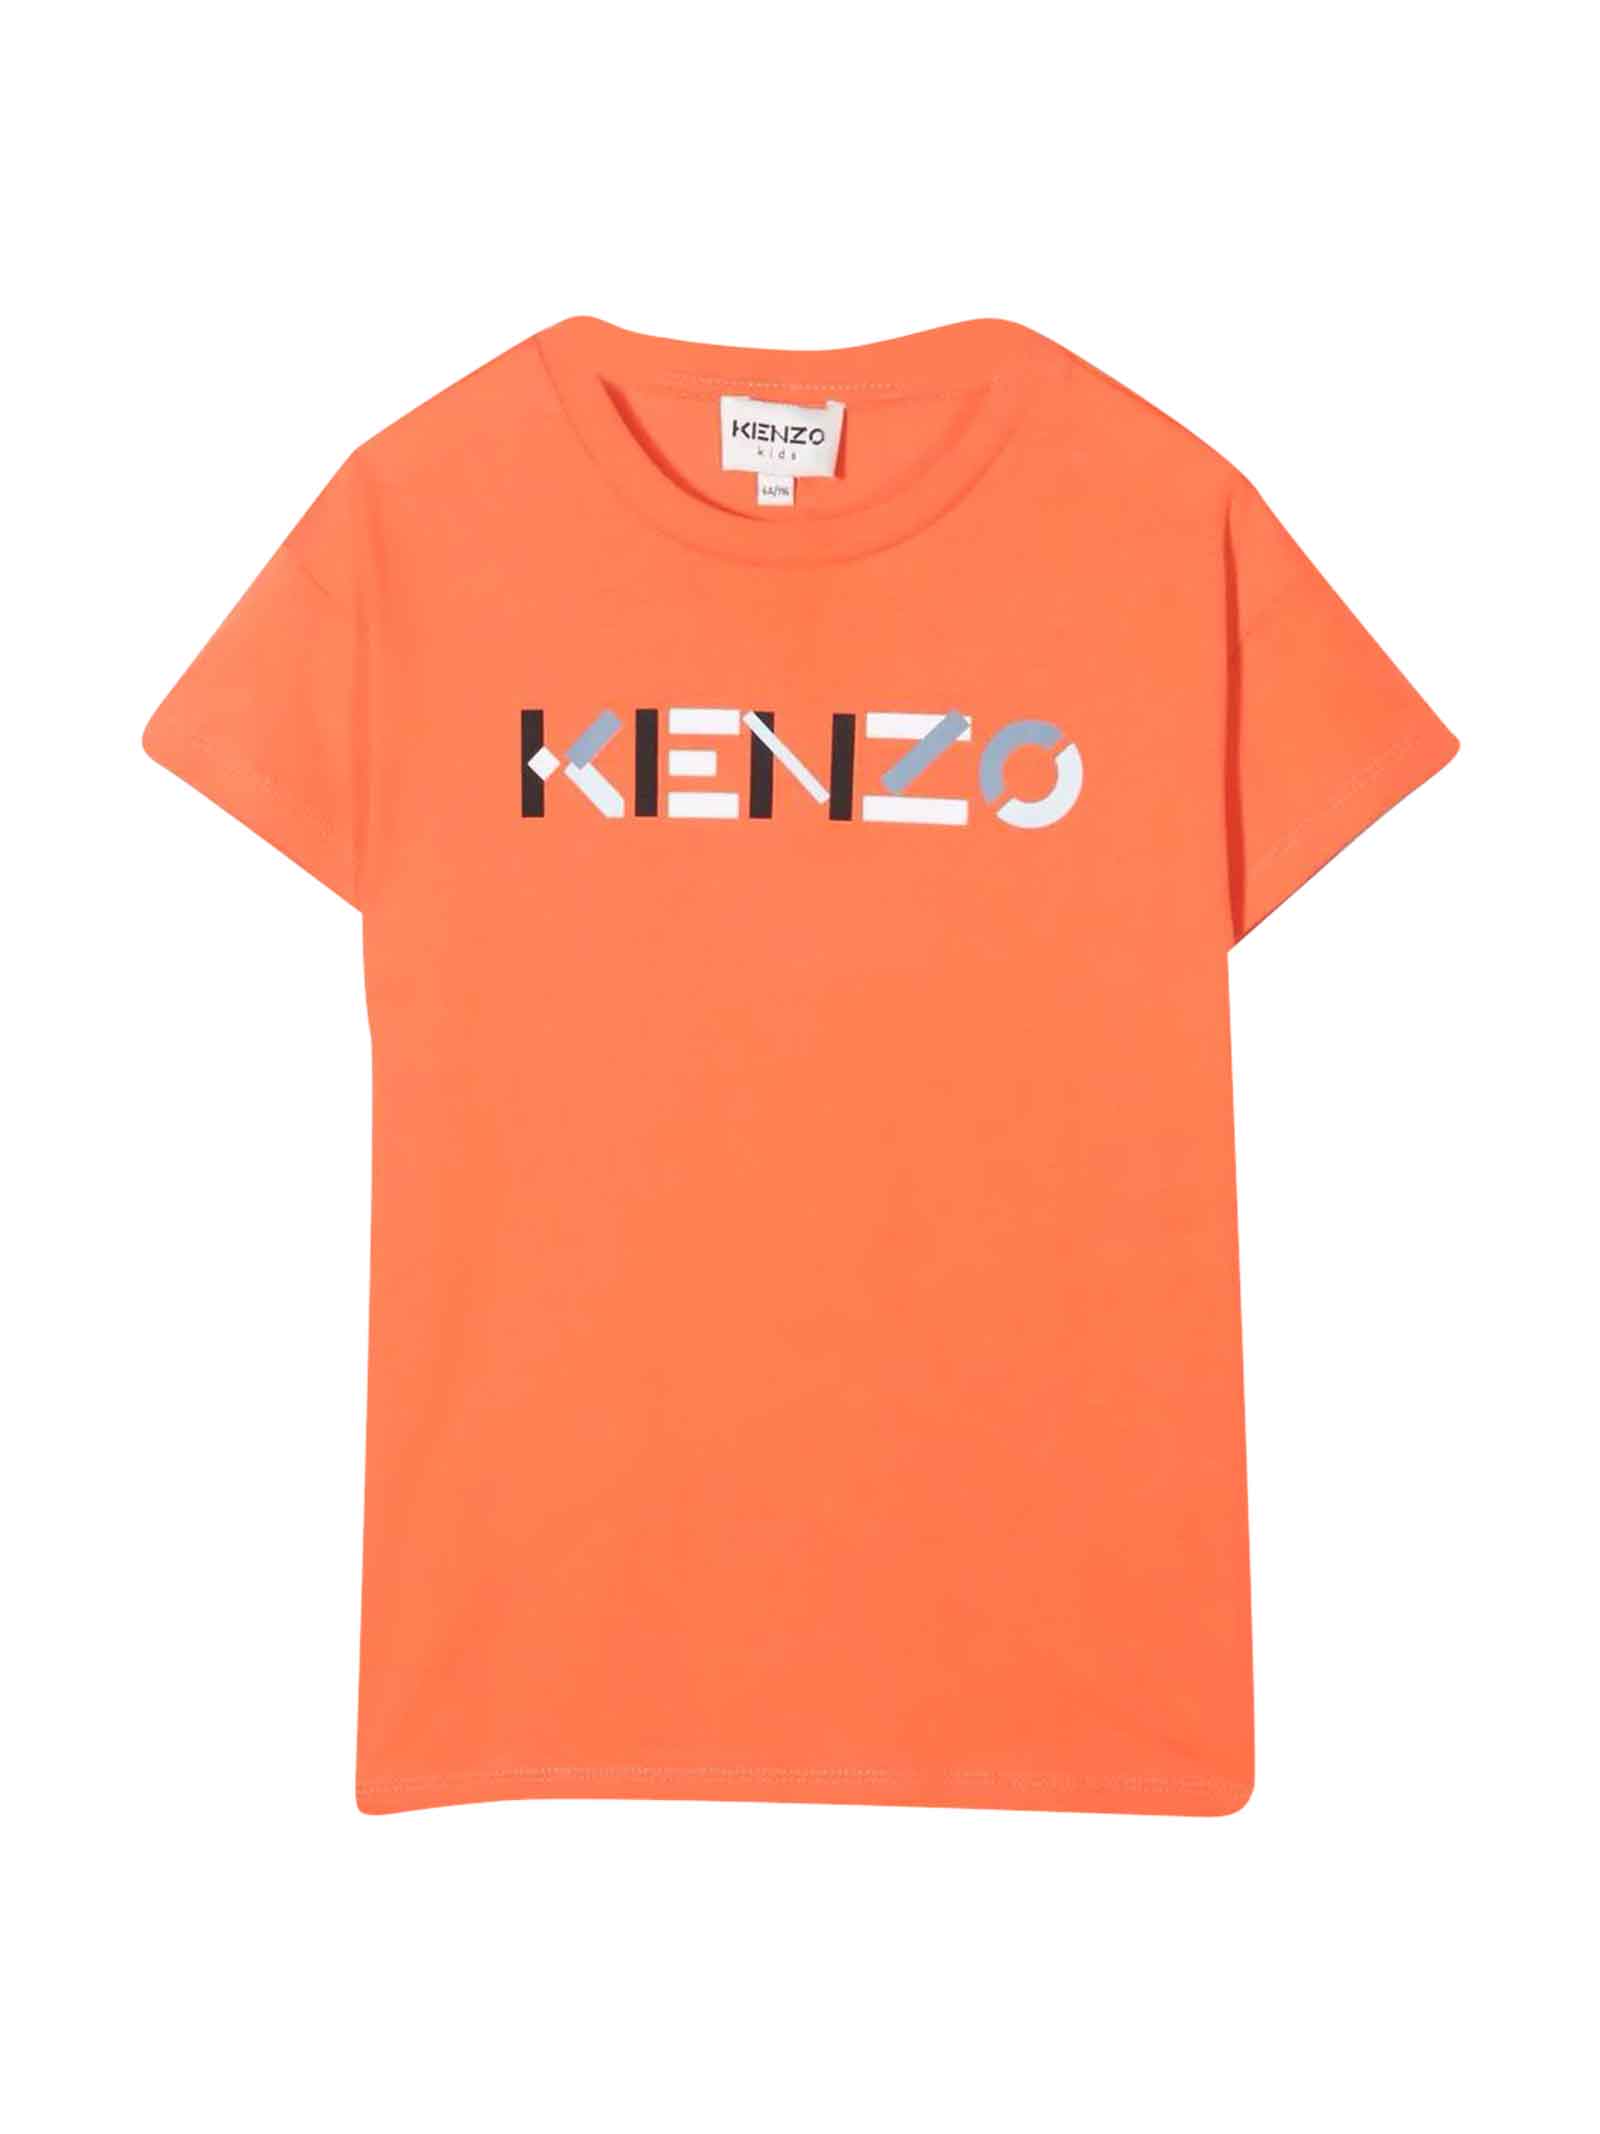 Kenzo Kids Orange Boy T-shirt With Logo Print On The Chest, Crew Neck And Short Sleeves By.